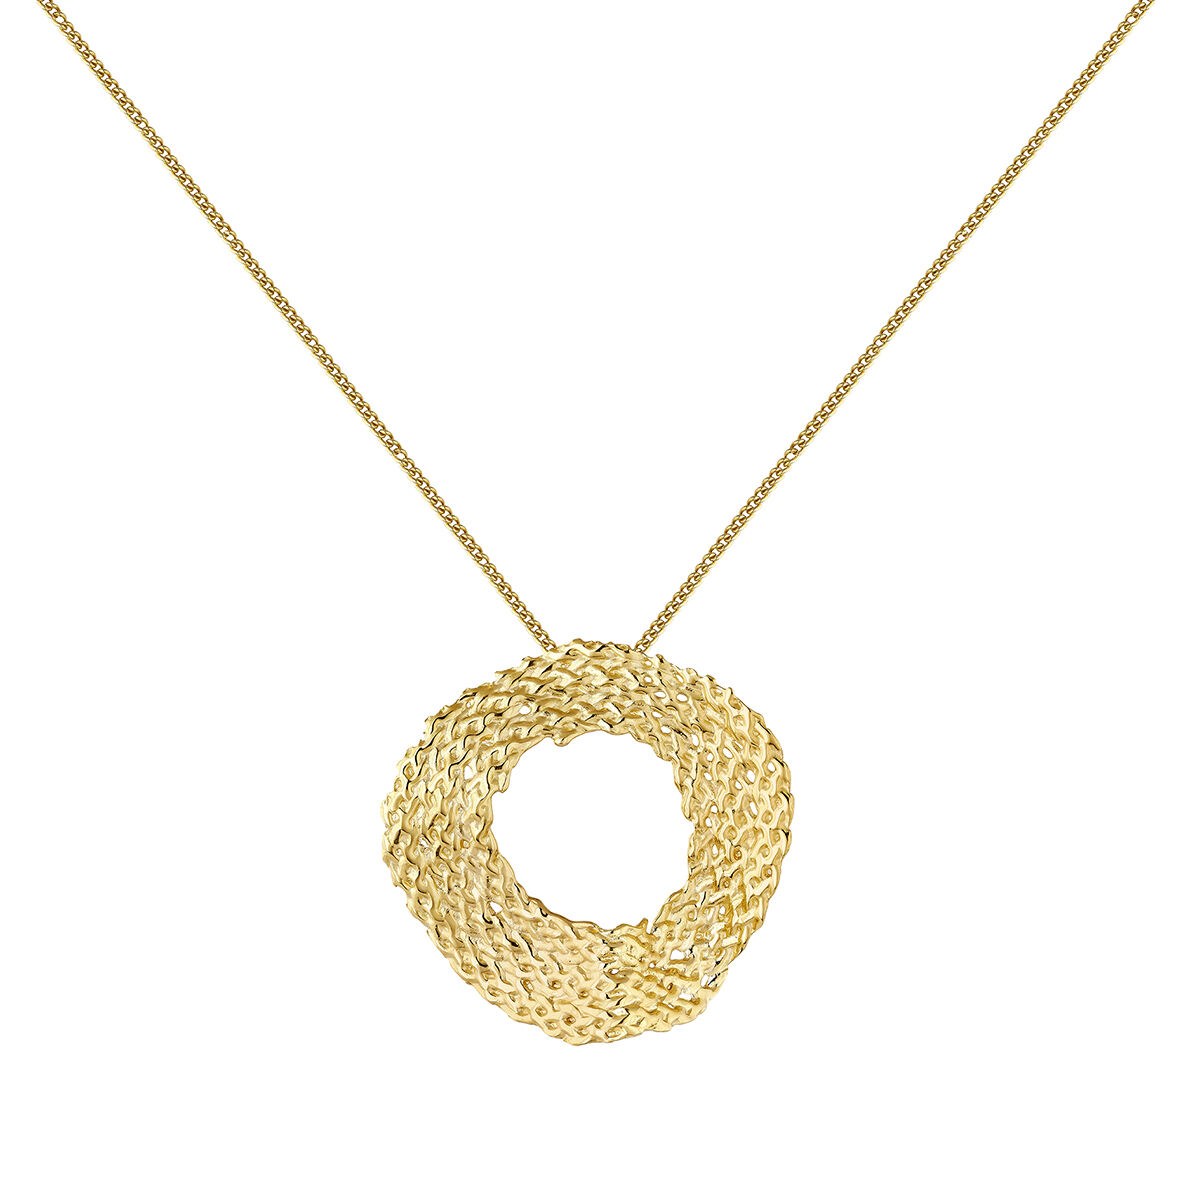 XL wicker-design oval pendant in 18kt yellow gold-plated silver, J04420-02, hi-res